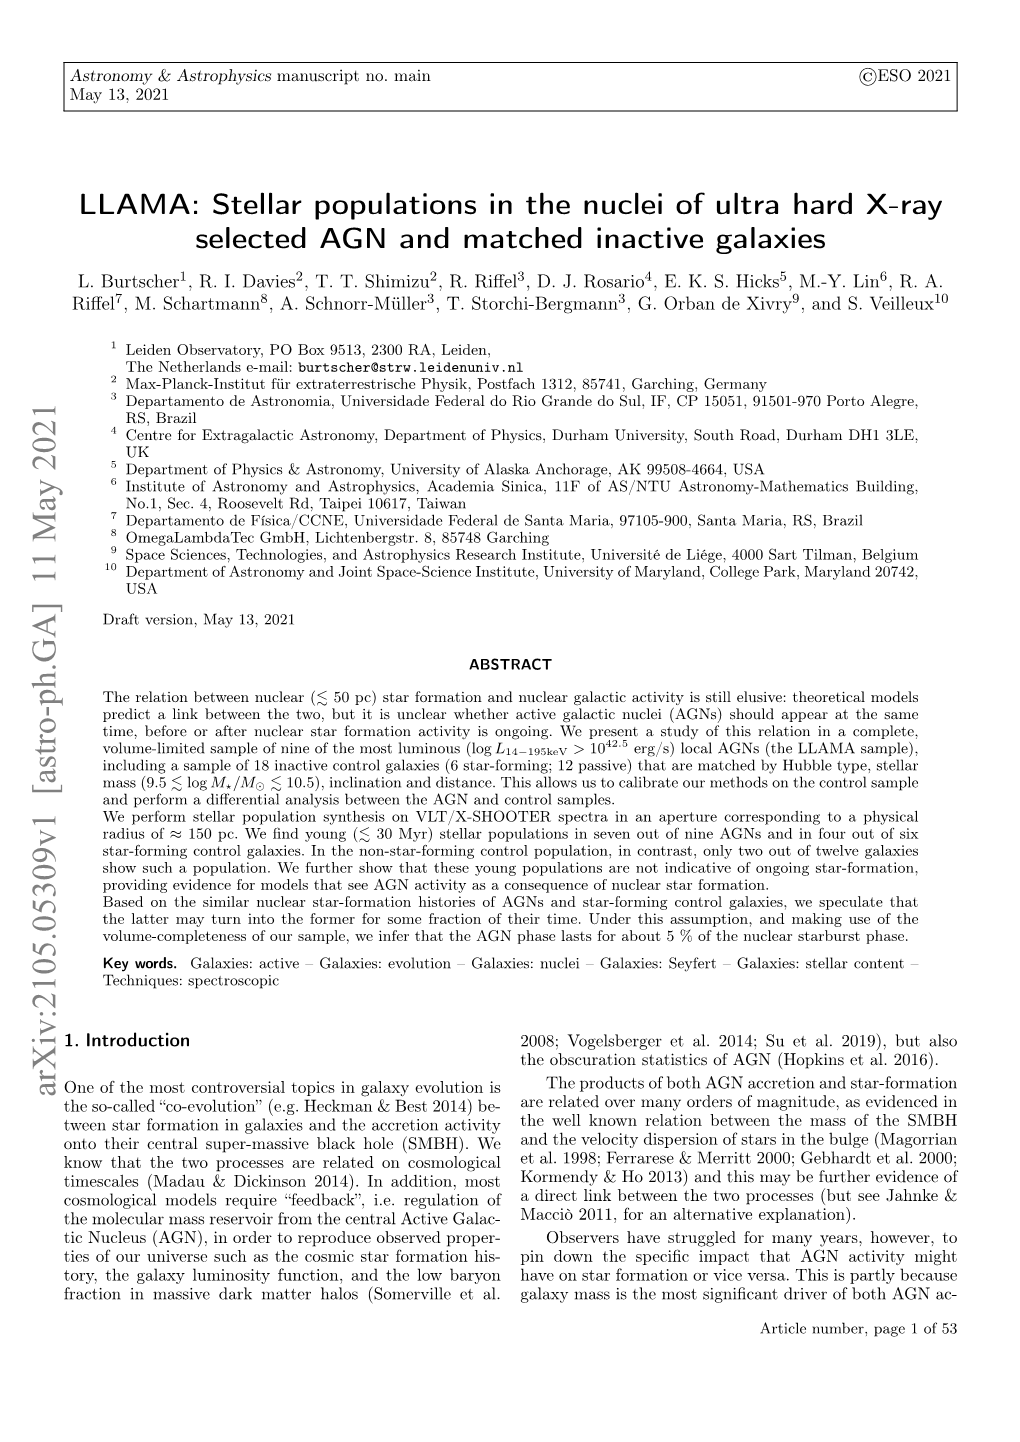 LLAMA: Stellar Populations in the Nuclei of Ultra Hard X-Ray Selected AGN and Matched Inactive Galaxies L